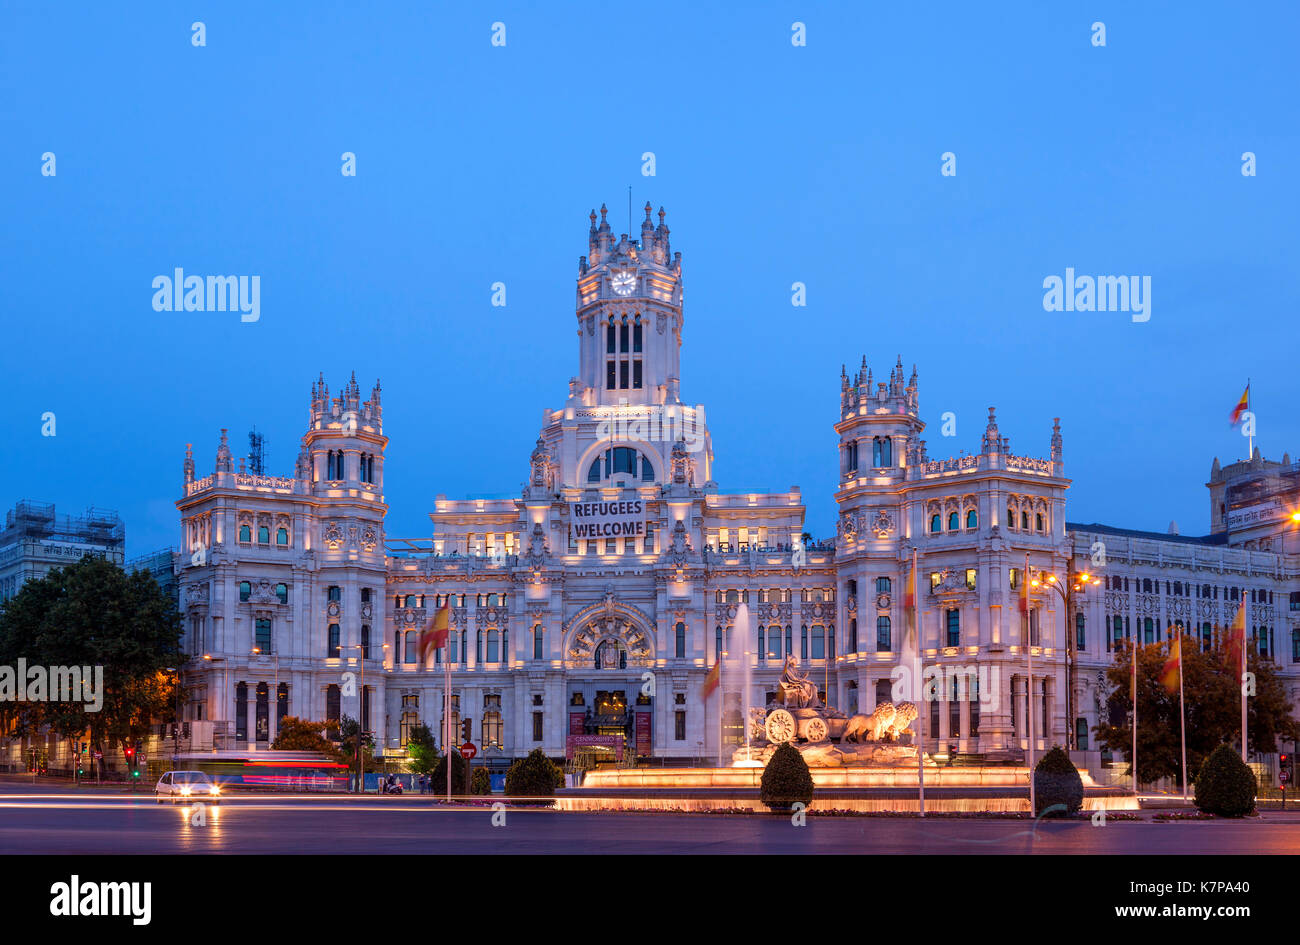 The Cibeles square in Madrid, Spain. There is the Palacio de Cibeles (Palace of Cybele) and the fountain of the goddess Cybele. Stock Photo